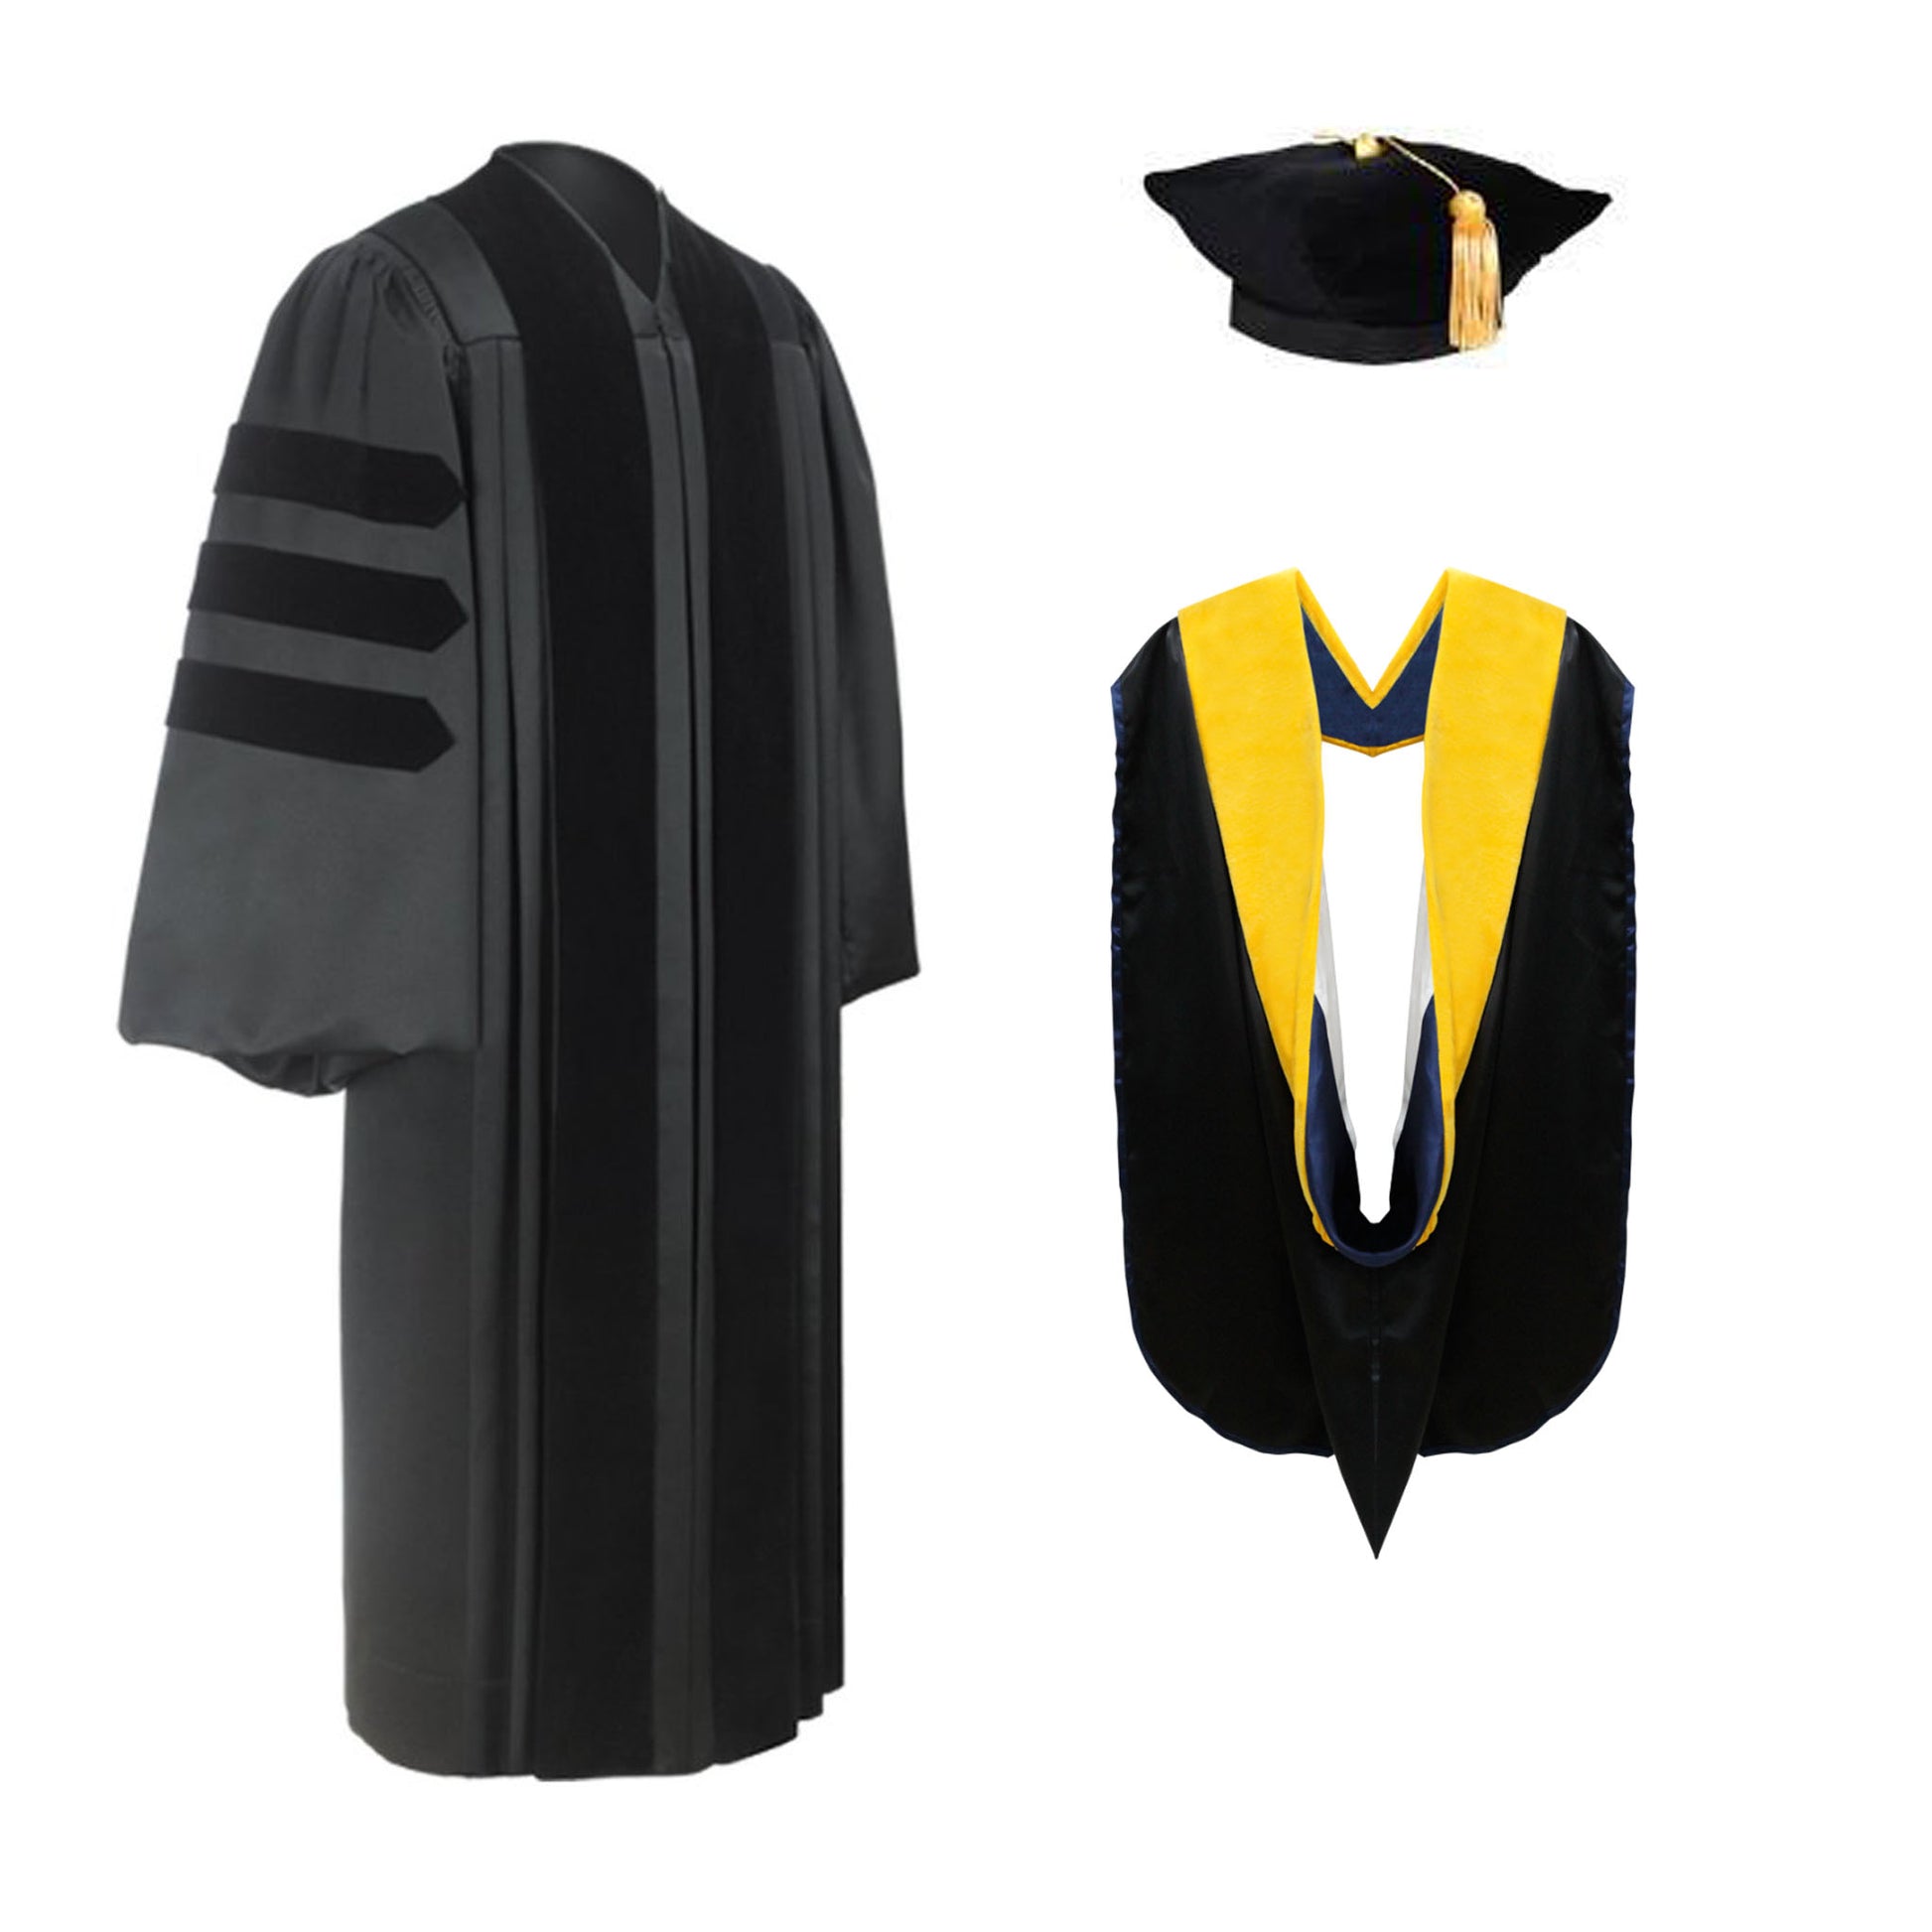 Deluxe Doctoral Graduation Tam, Gown & Hood Package - Graduation Cap and Gown